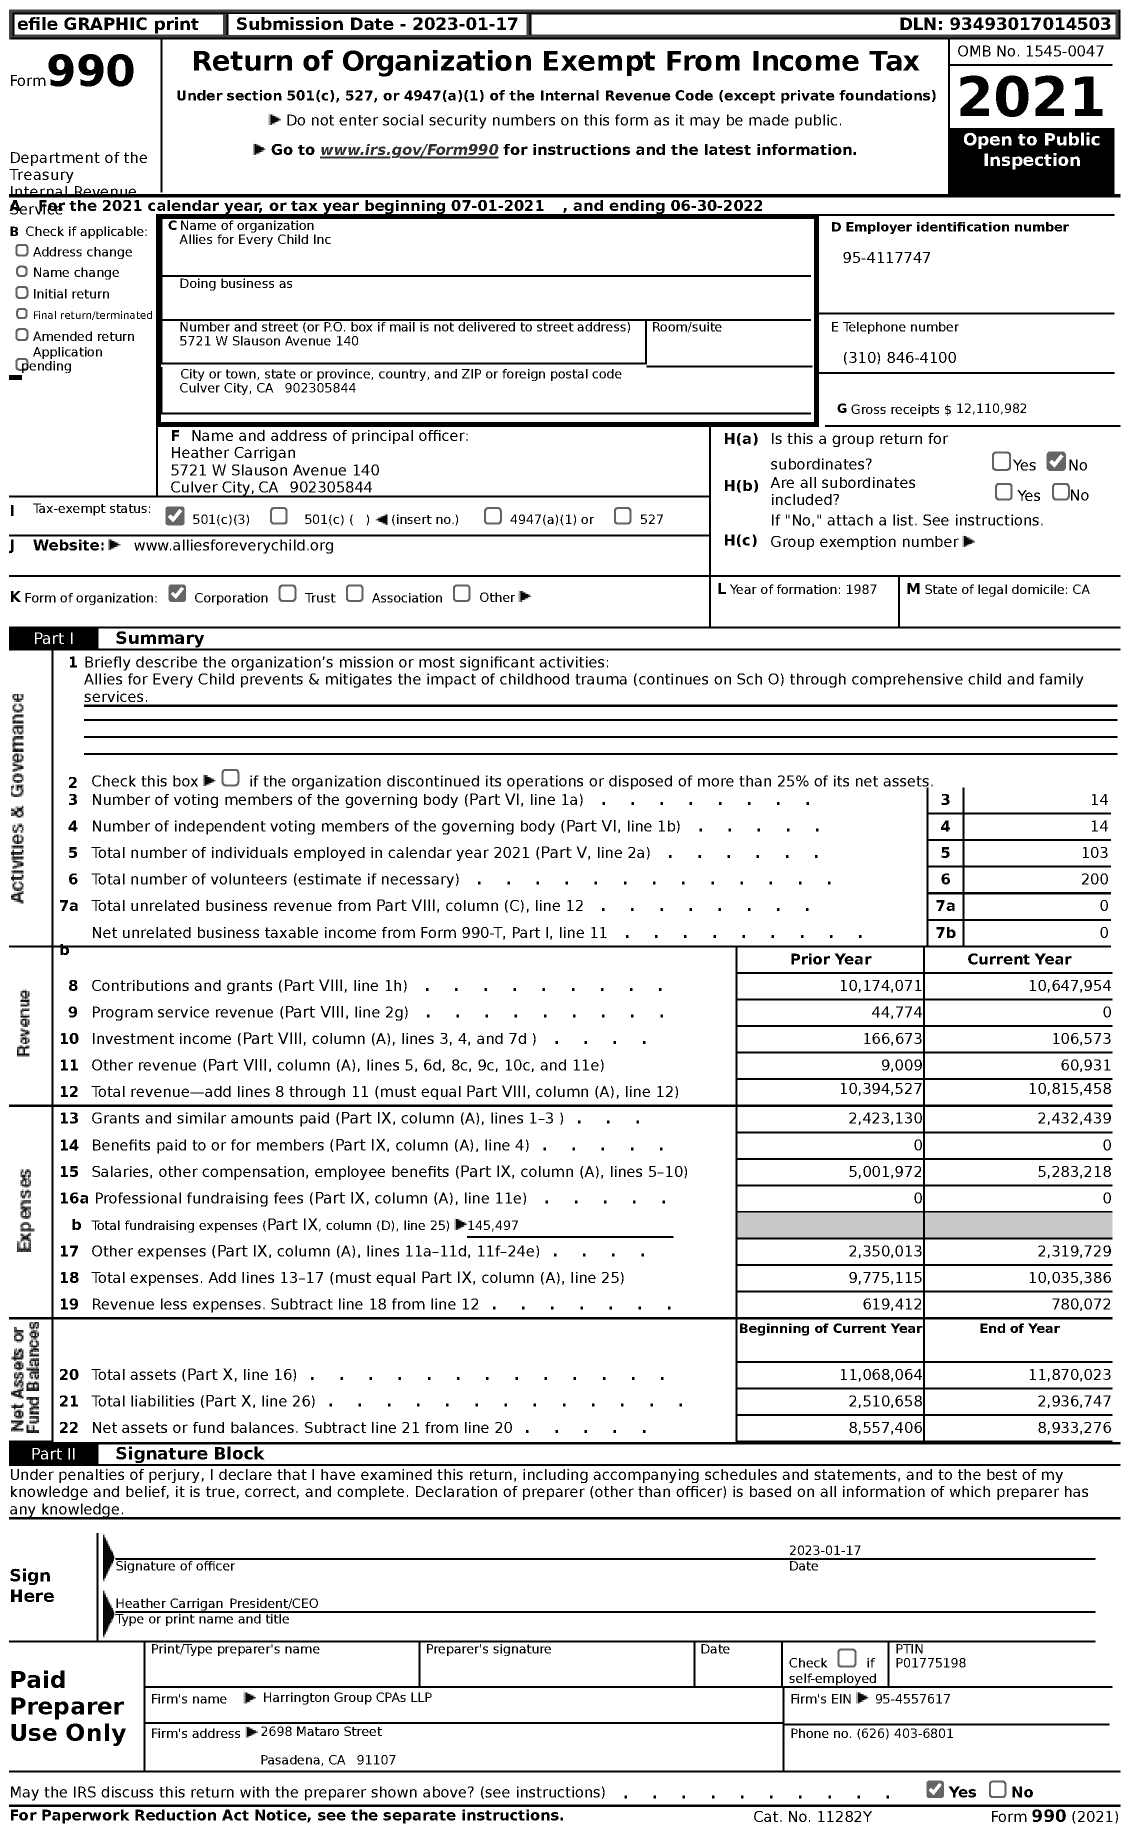 Image of first page of 2021 Form 990 for Allies for Every Childrens